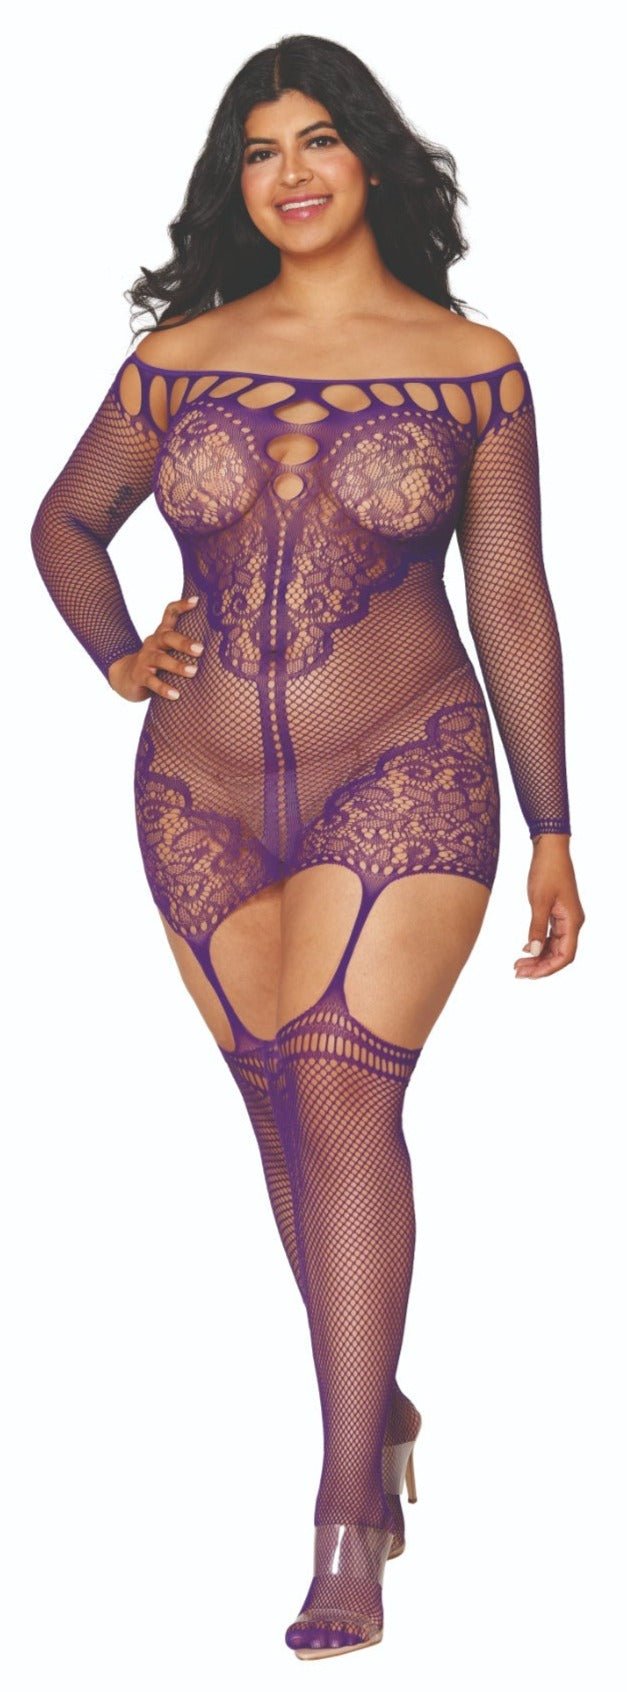 Curvy Off Shoulder Fishnet Bodystocking Dress with Lace Accents Musotica.com